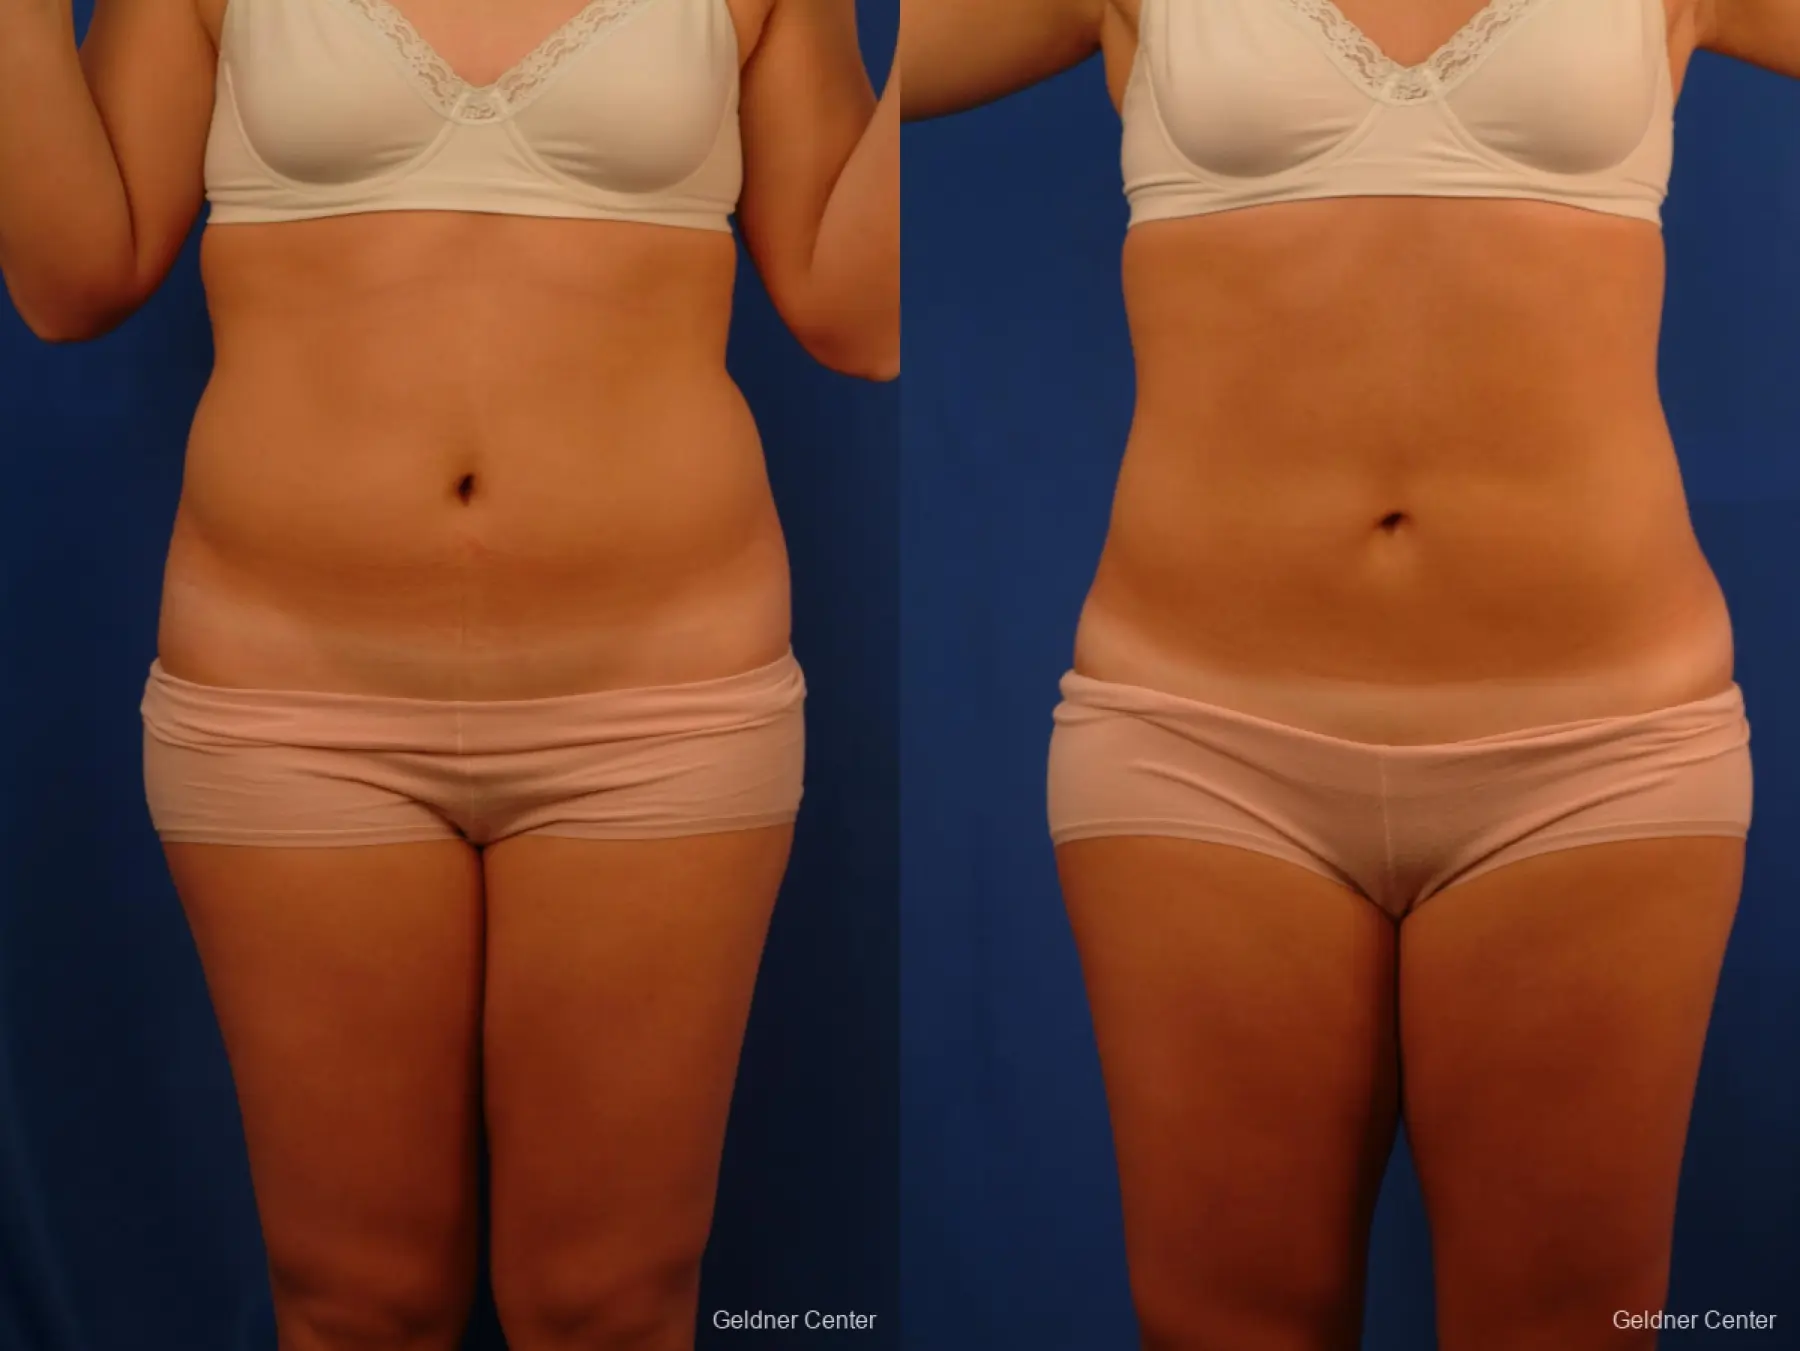 Vaser lipo patient 2514 before and after photos - Before and After